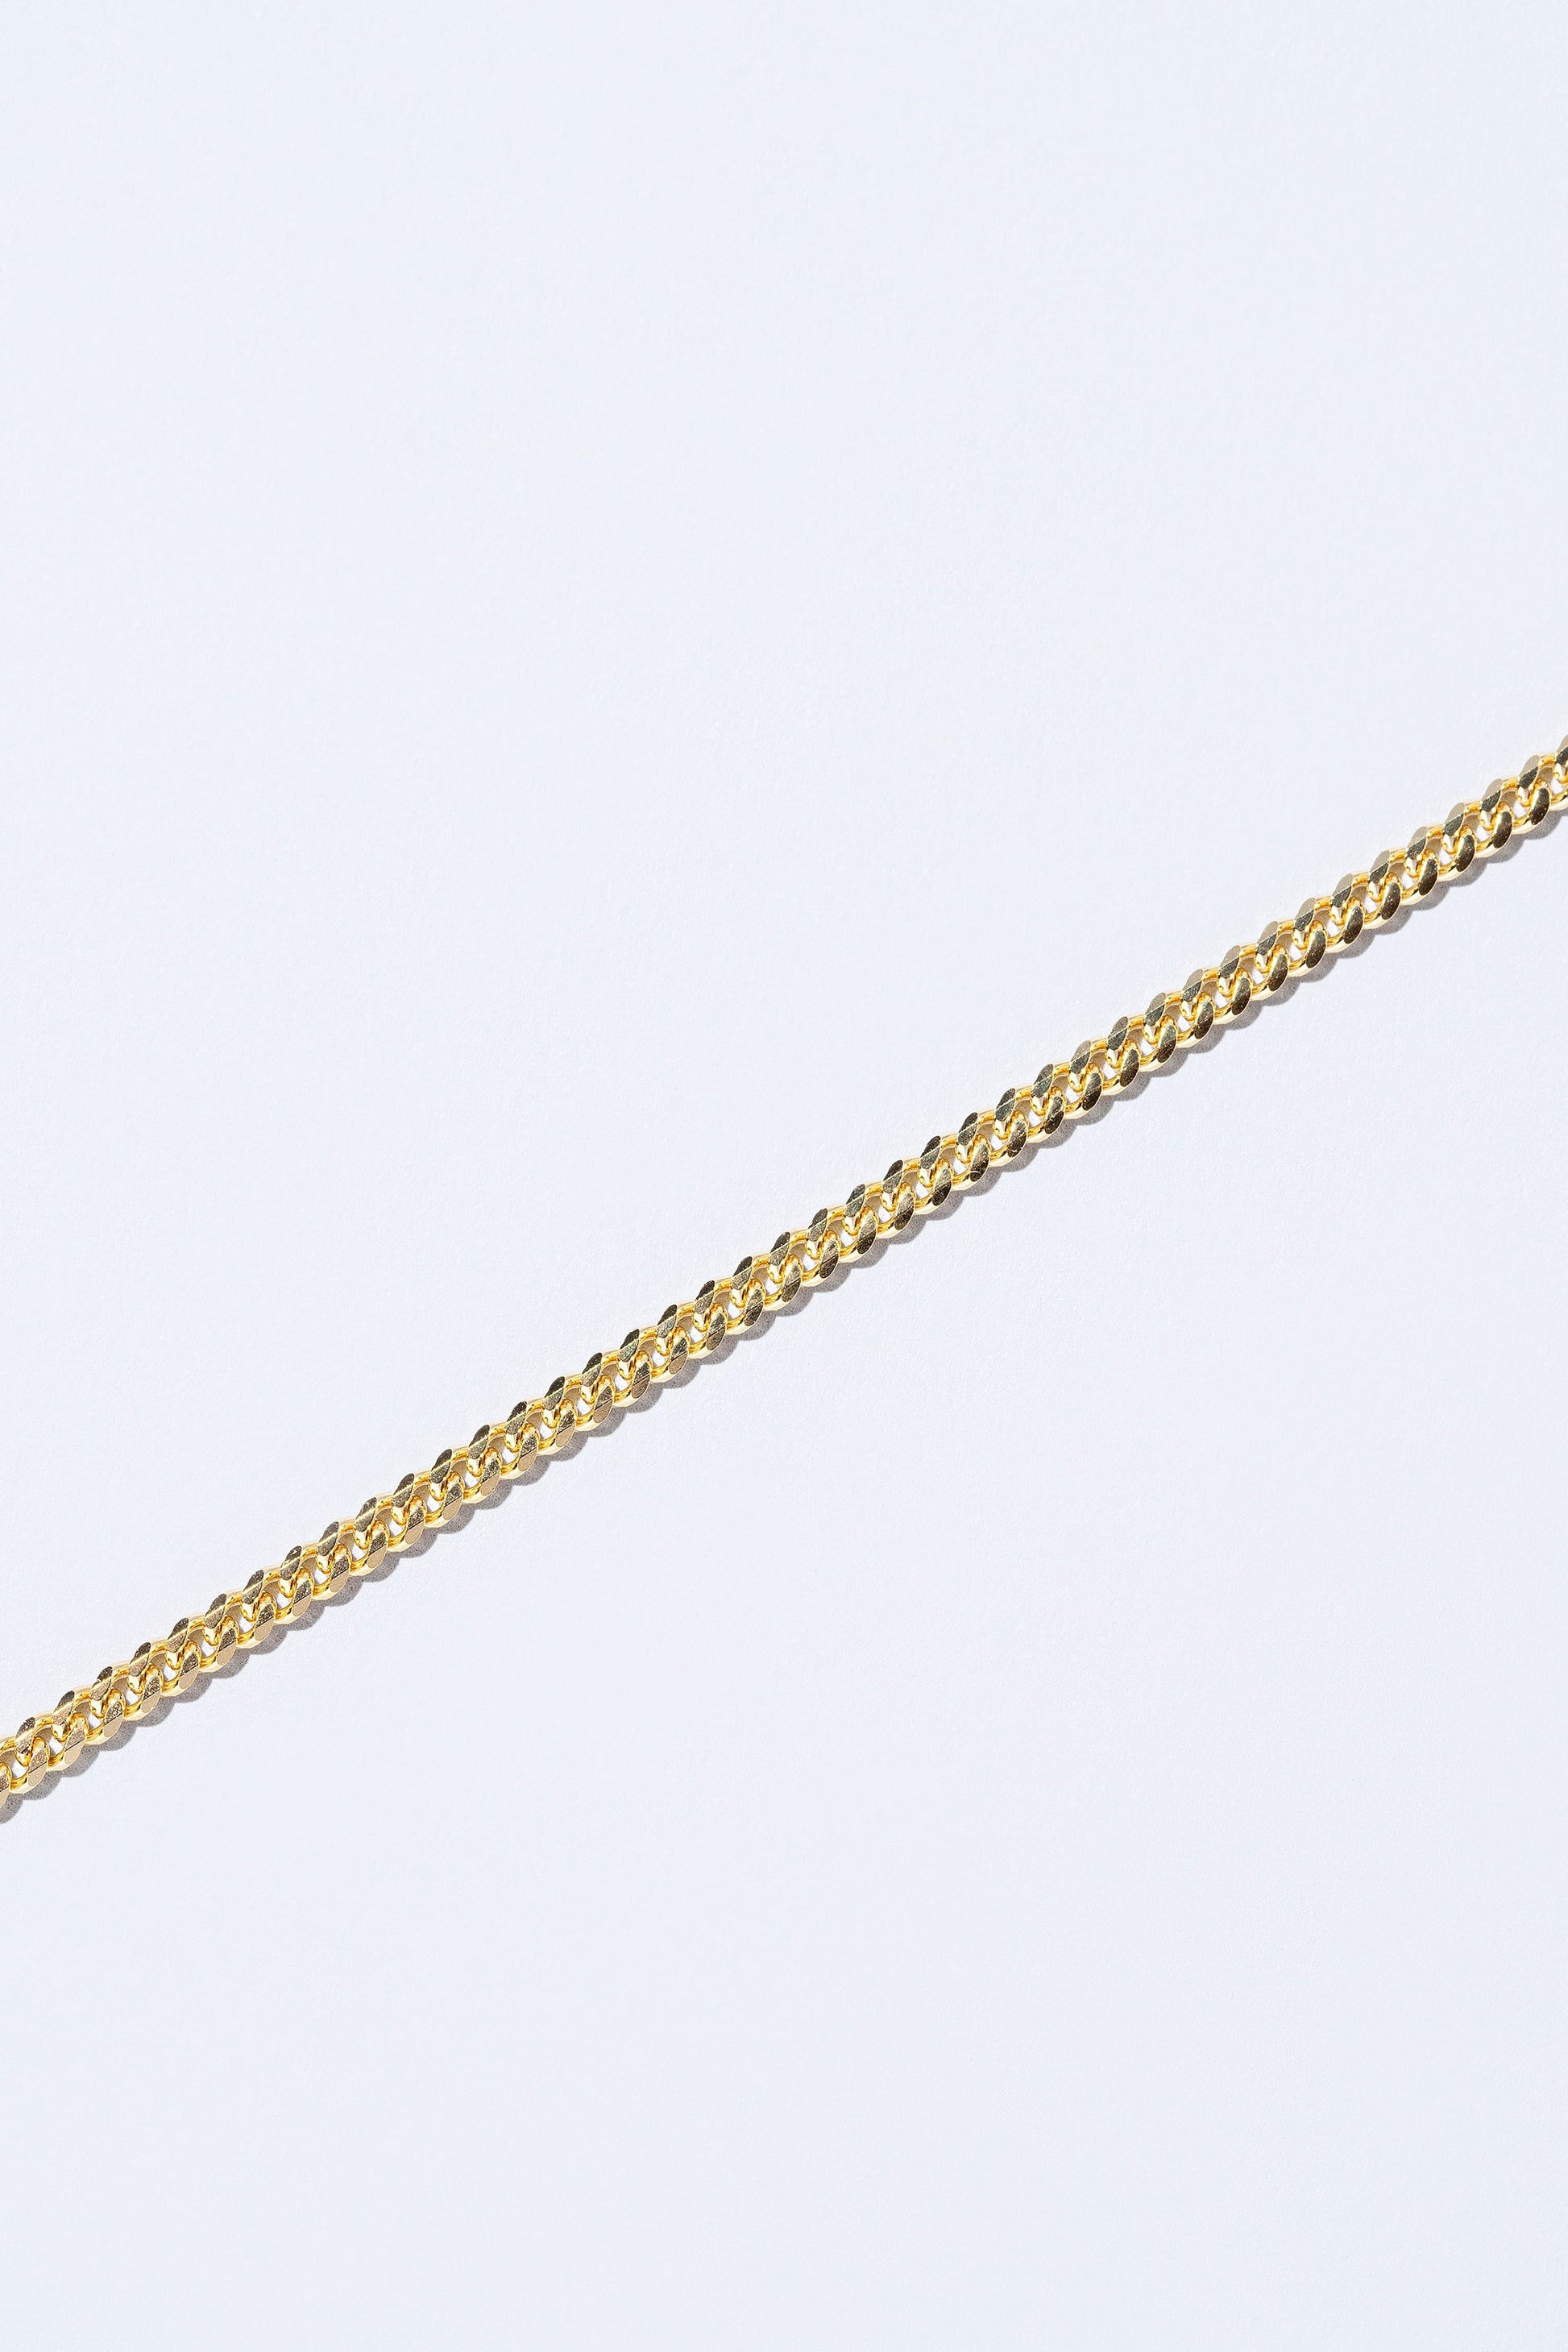 Medium Gold Curb Chain Necklace in Yellow, Rose or White Gold